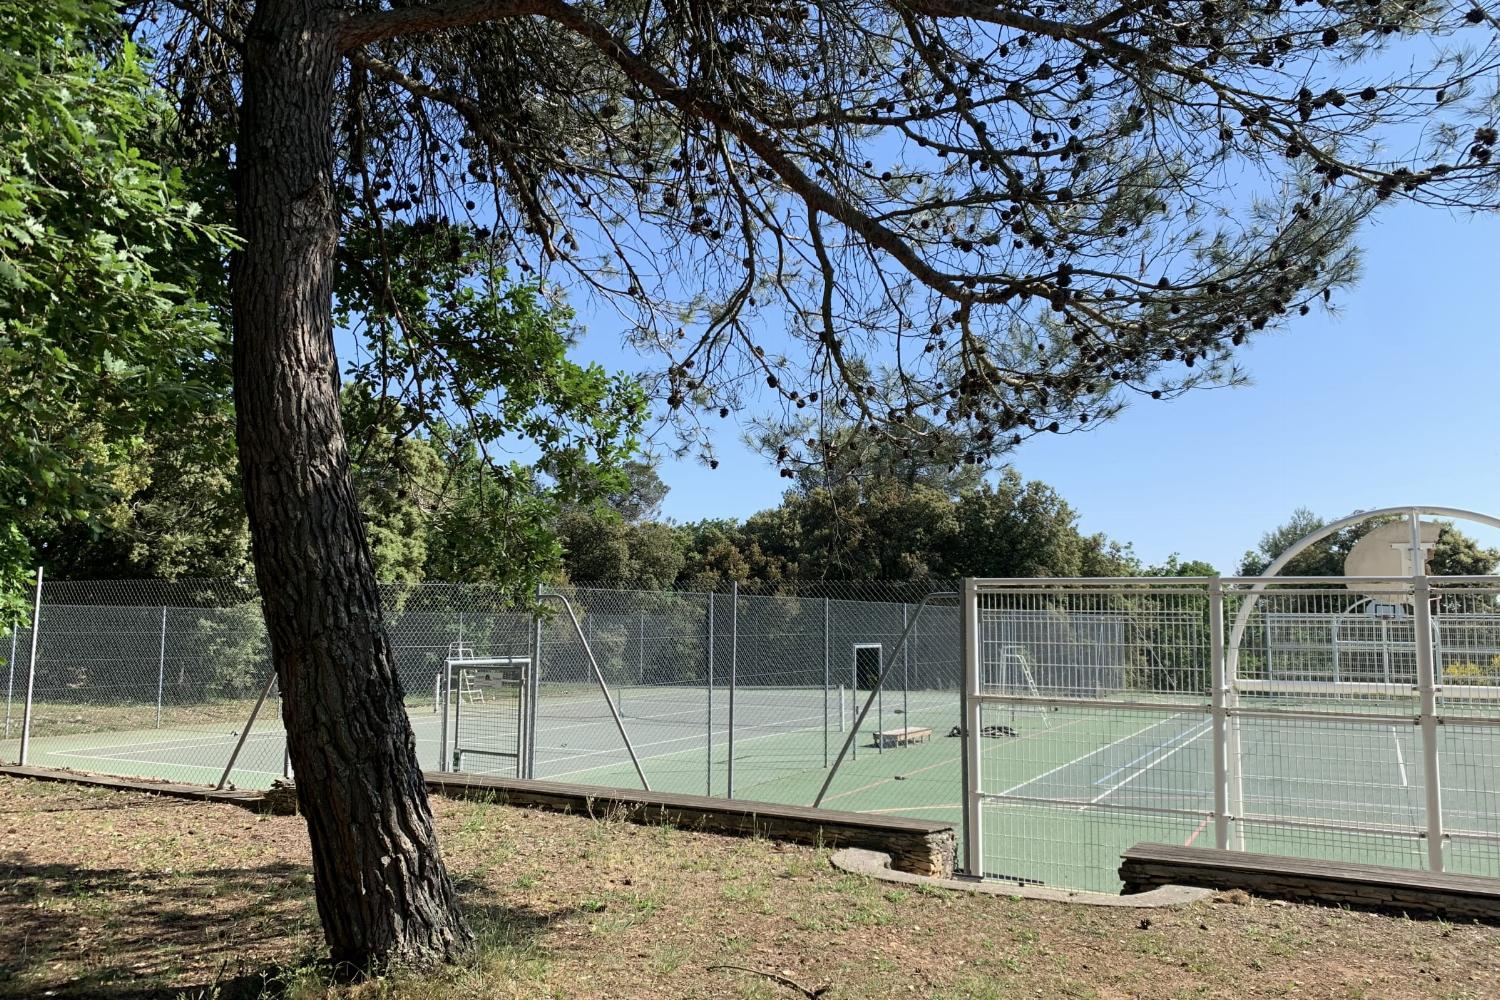 Local tennis courts